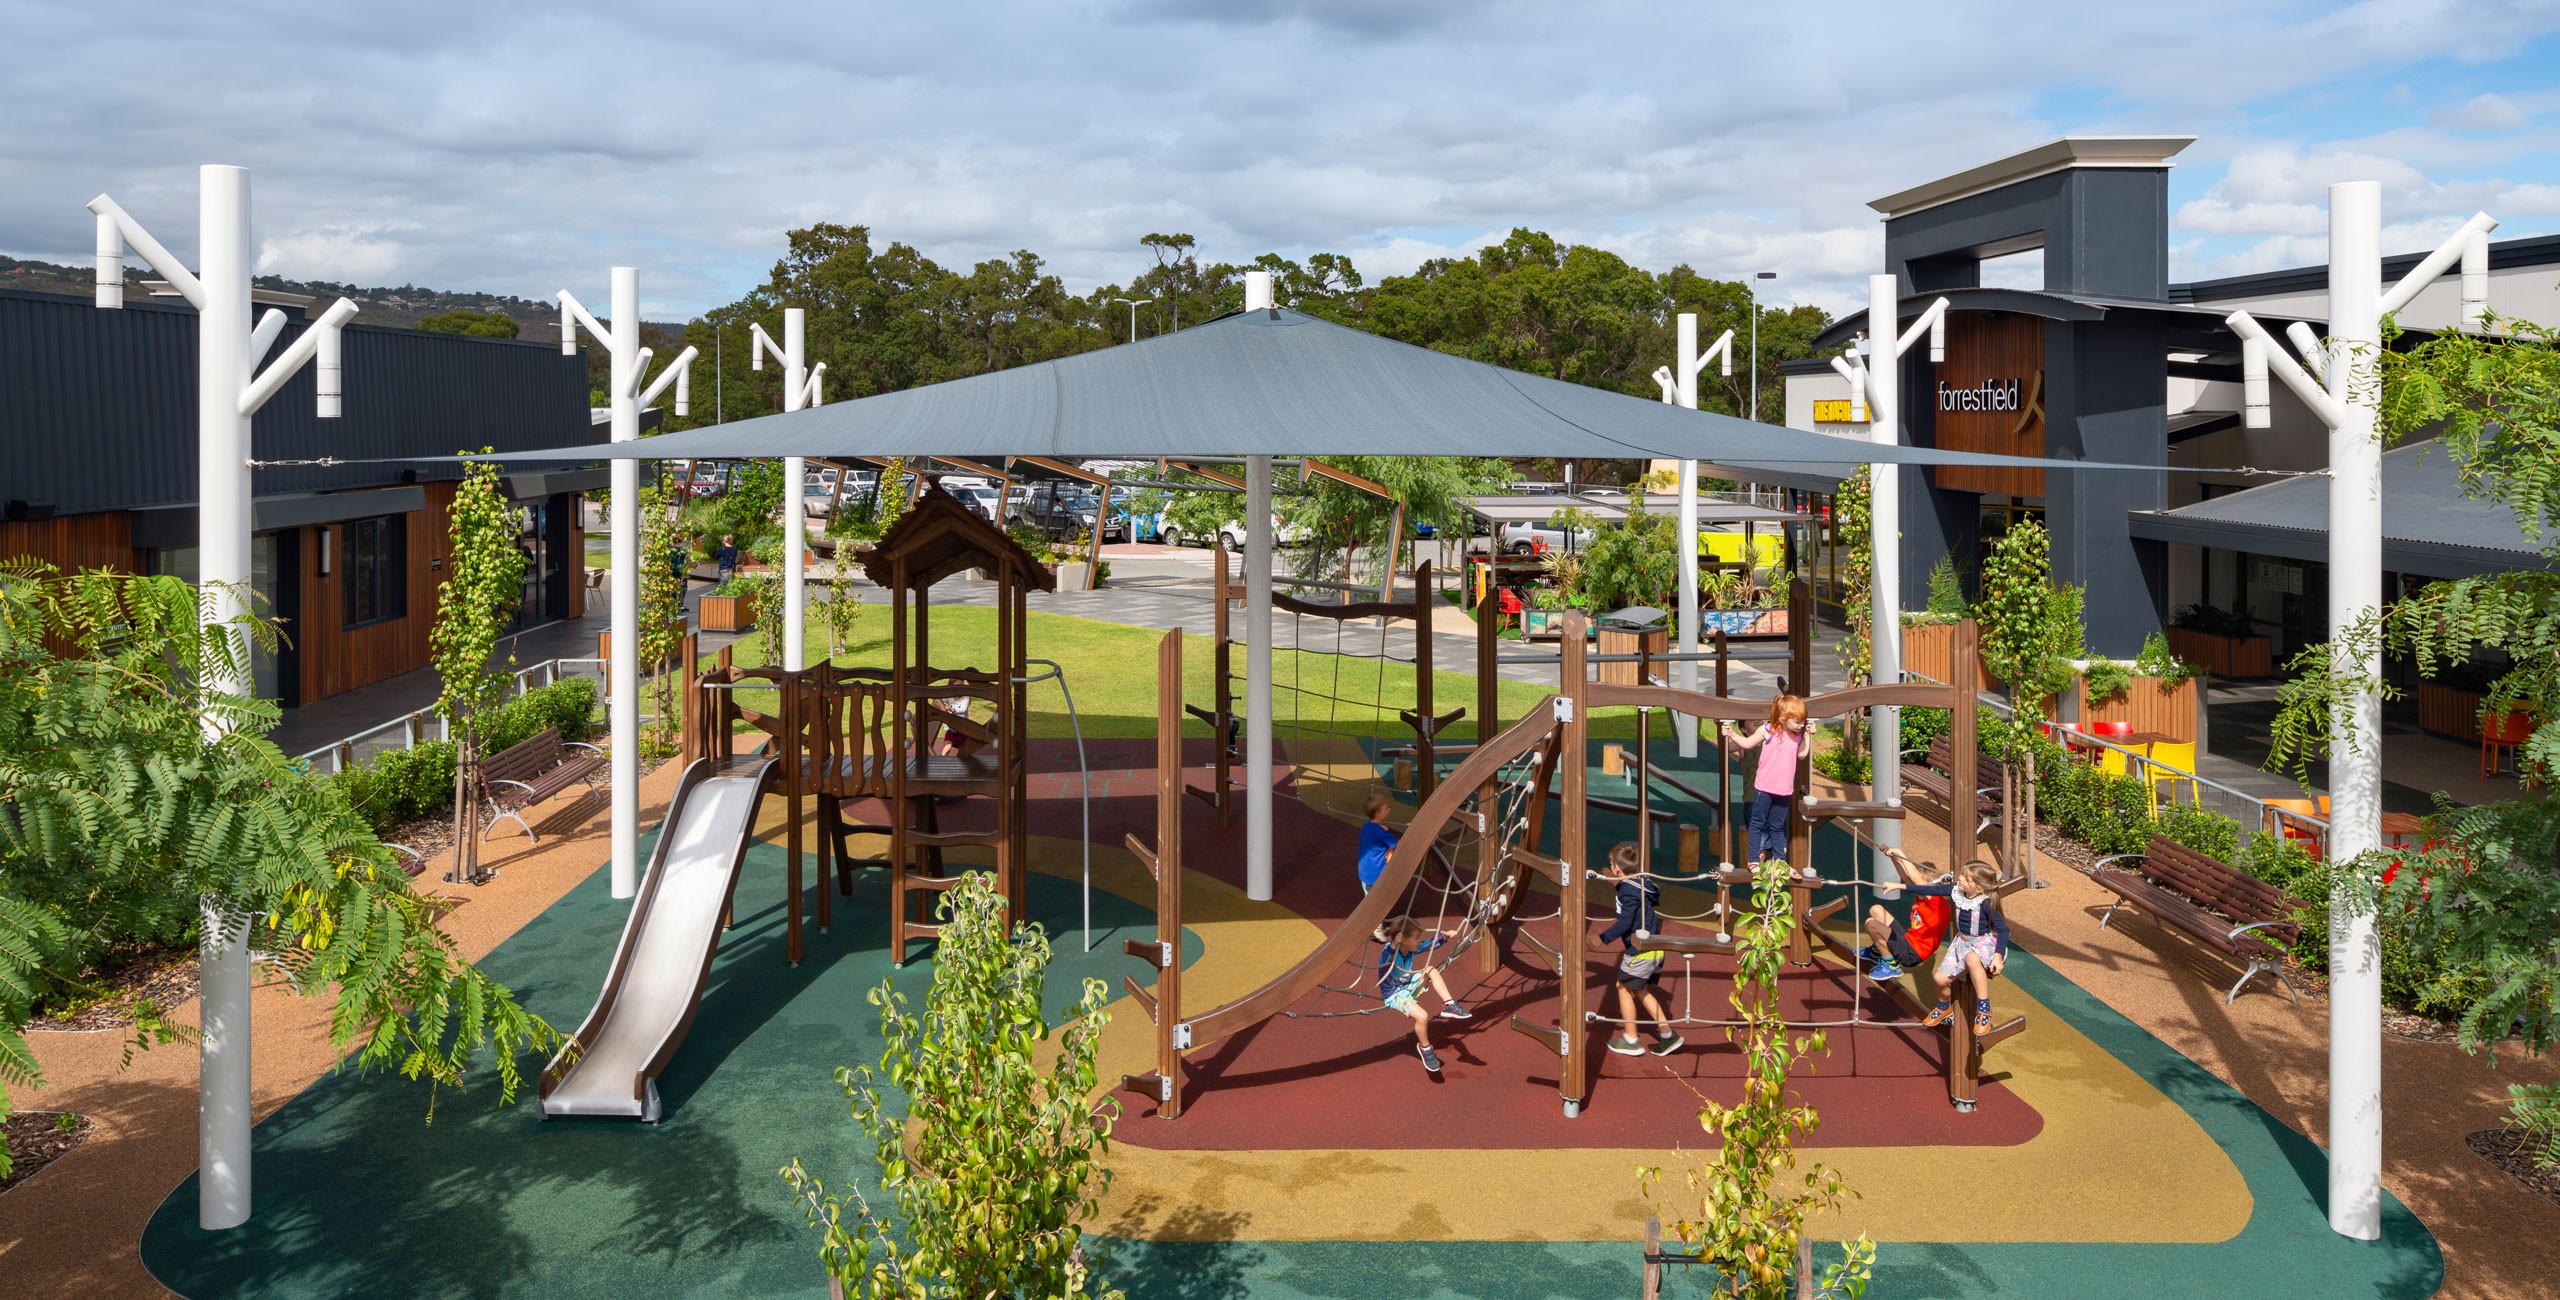 Family friendly shopping with fun outdoor play area plus indoor play room too!